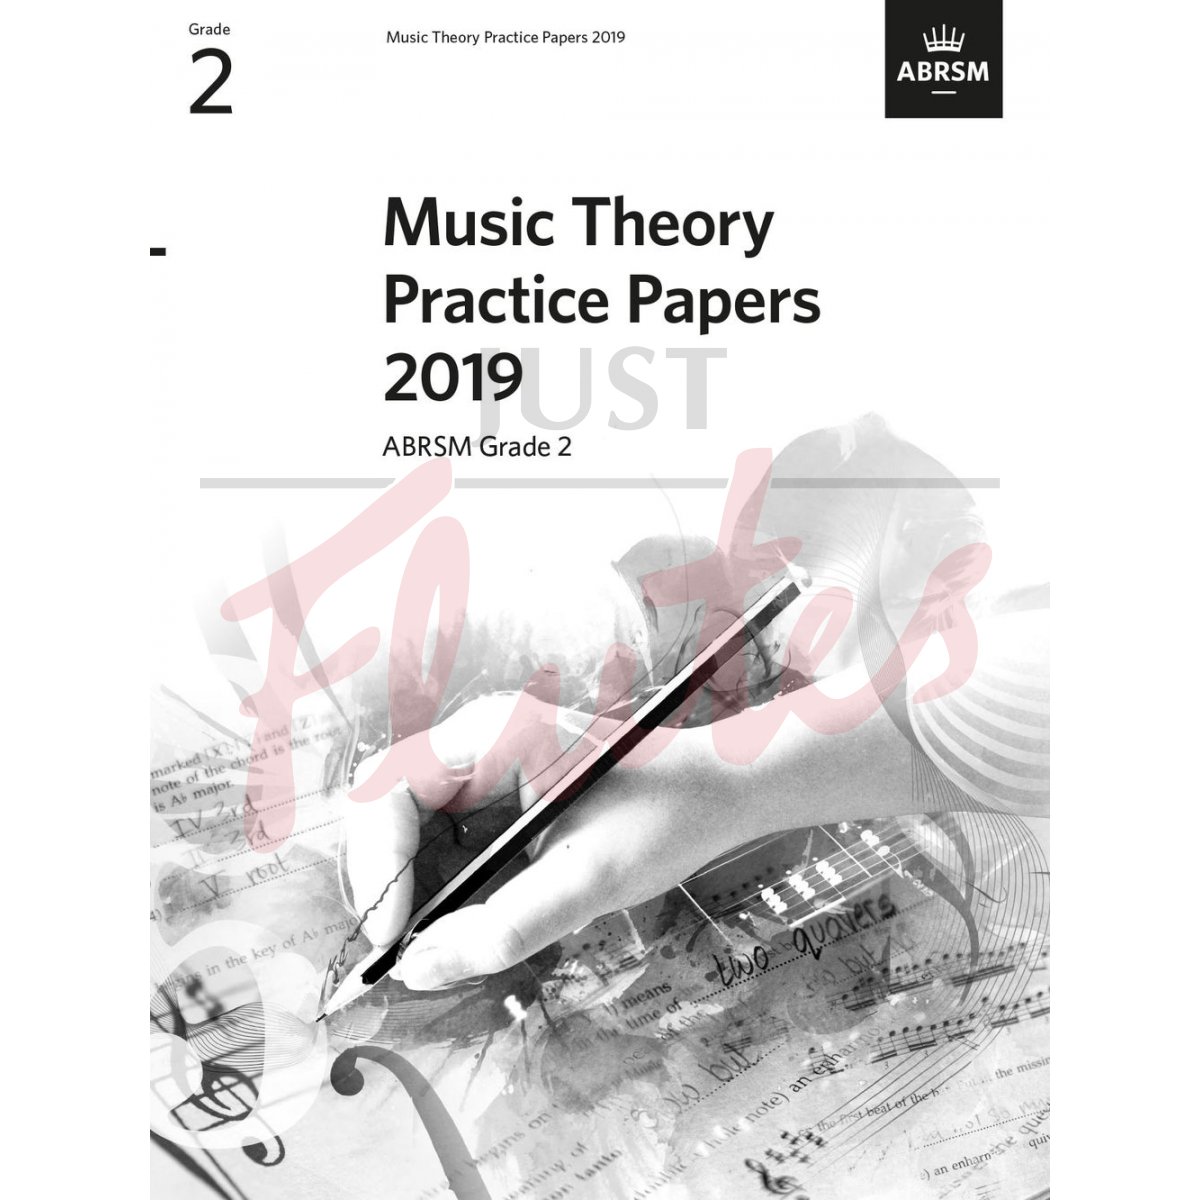 Music Theory Practice Papers 2019 Grade 2